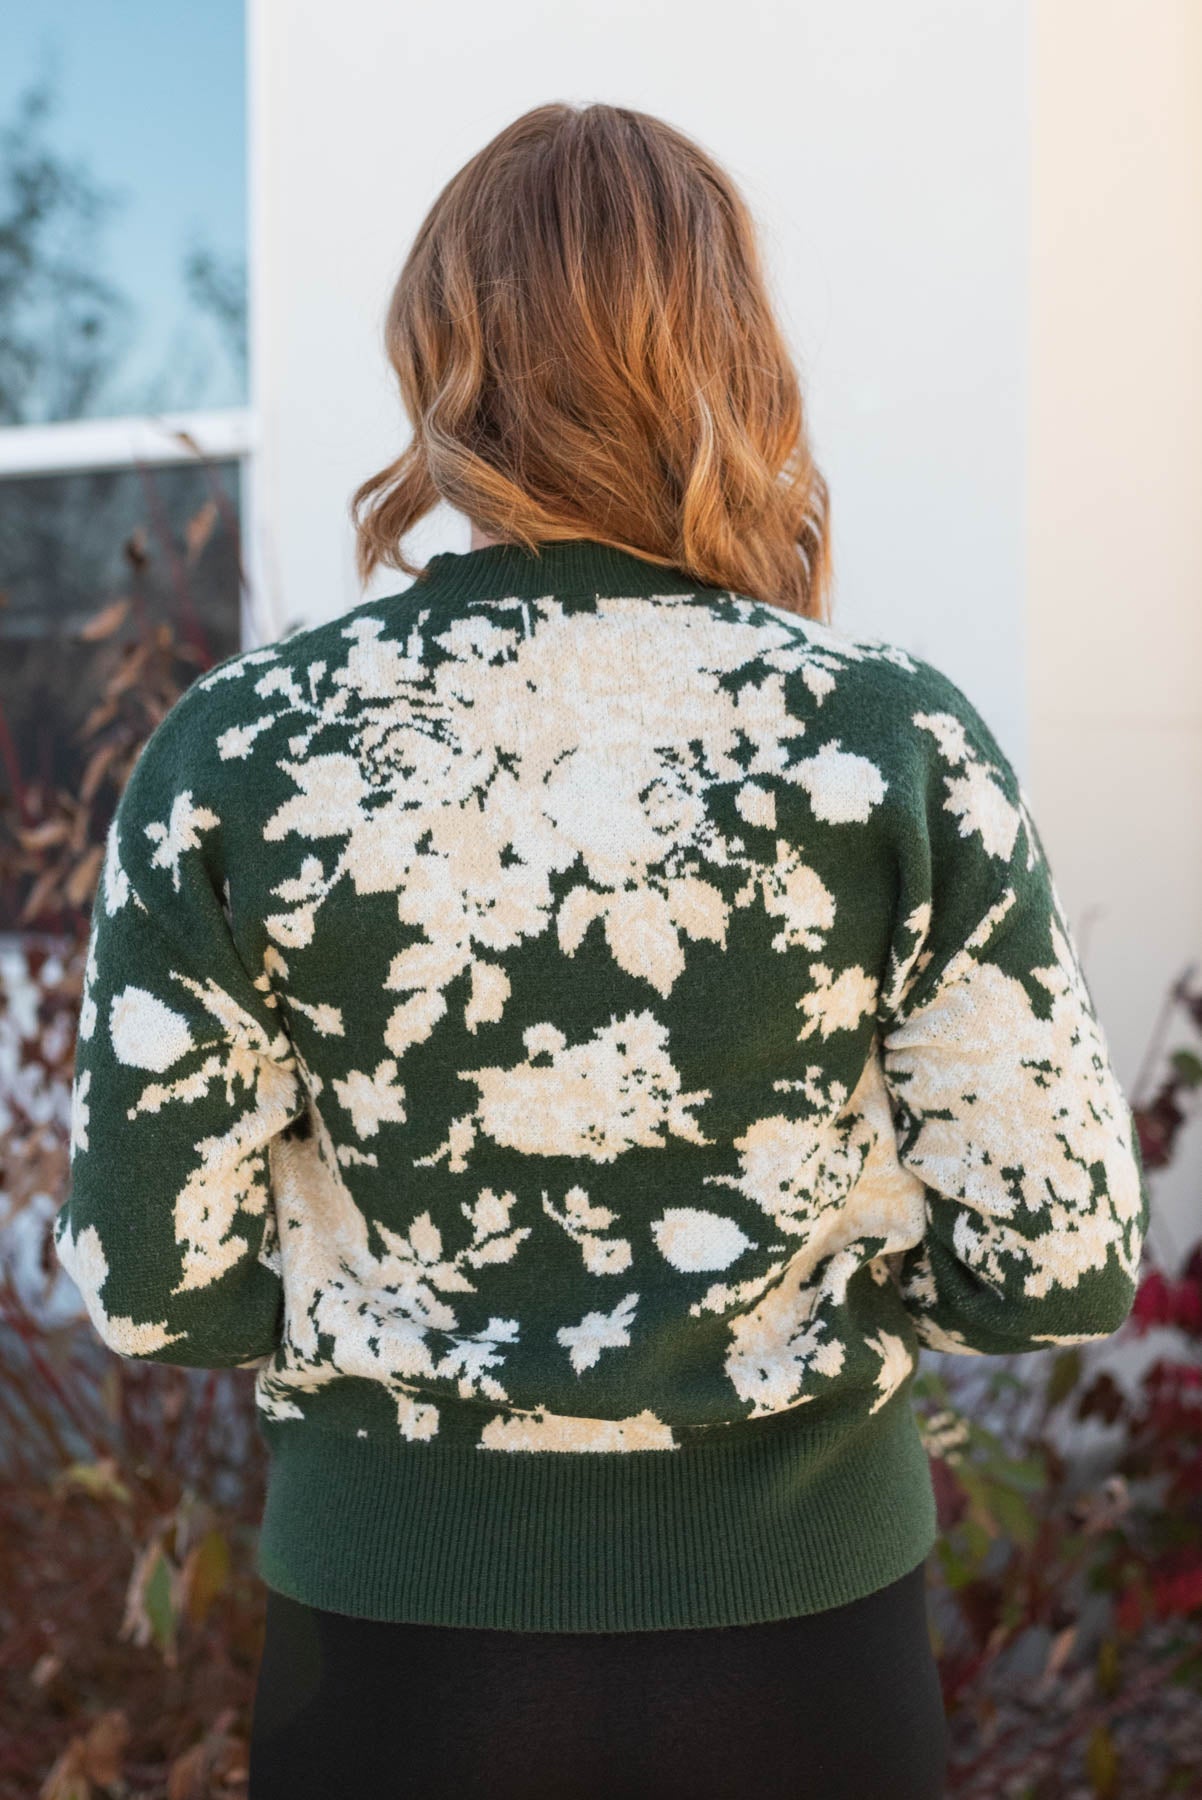 Back view of a green floral sweater